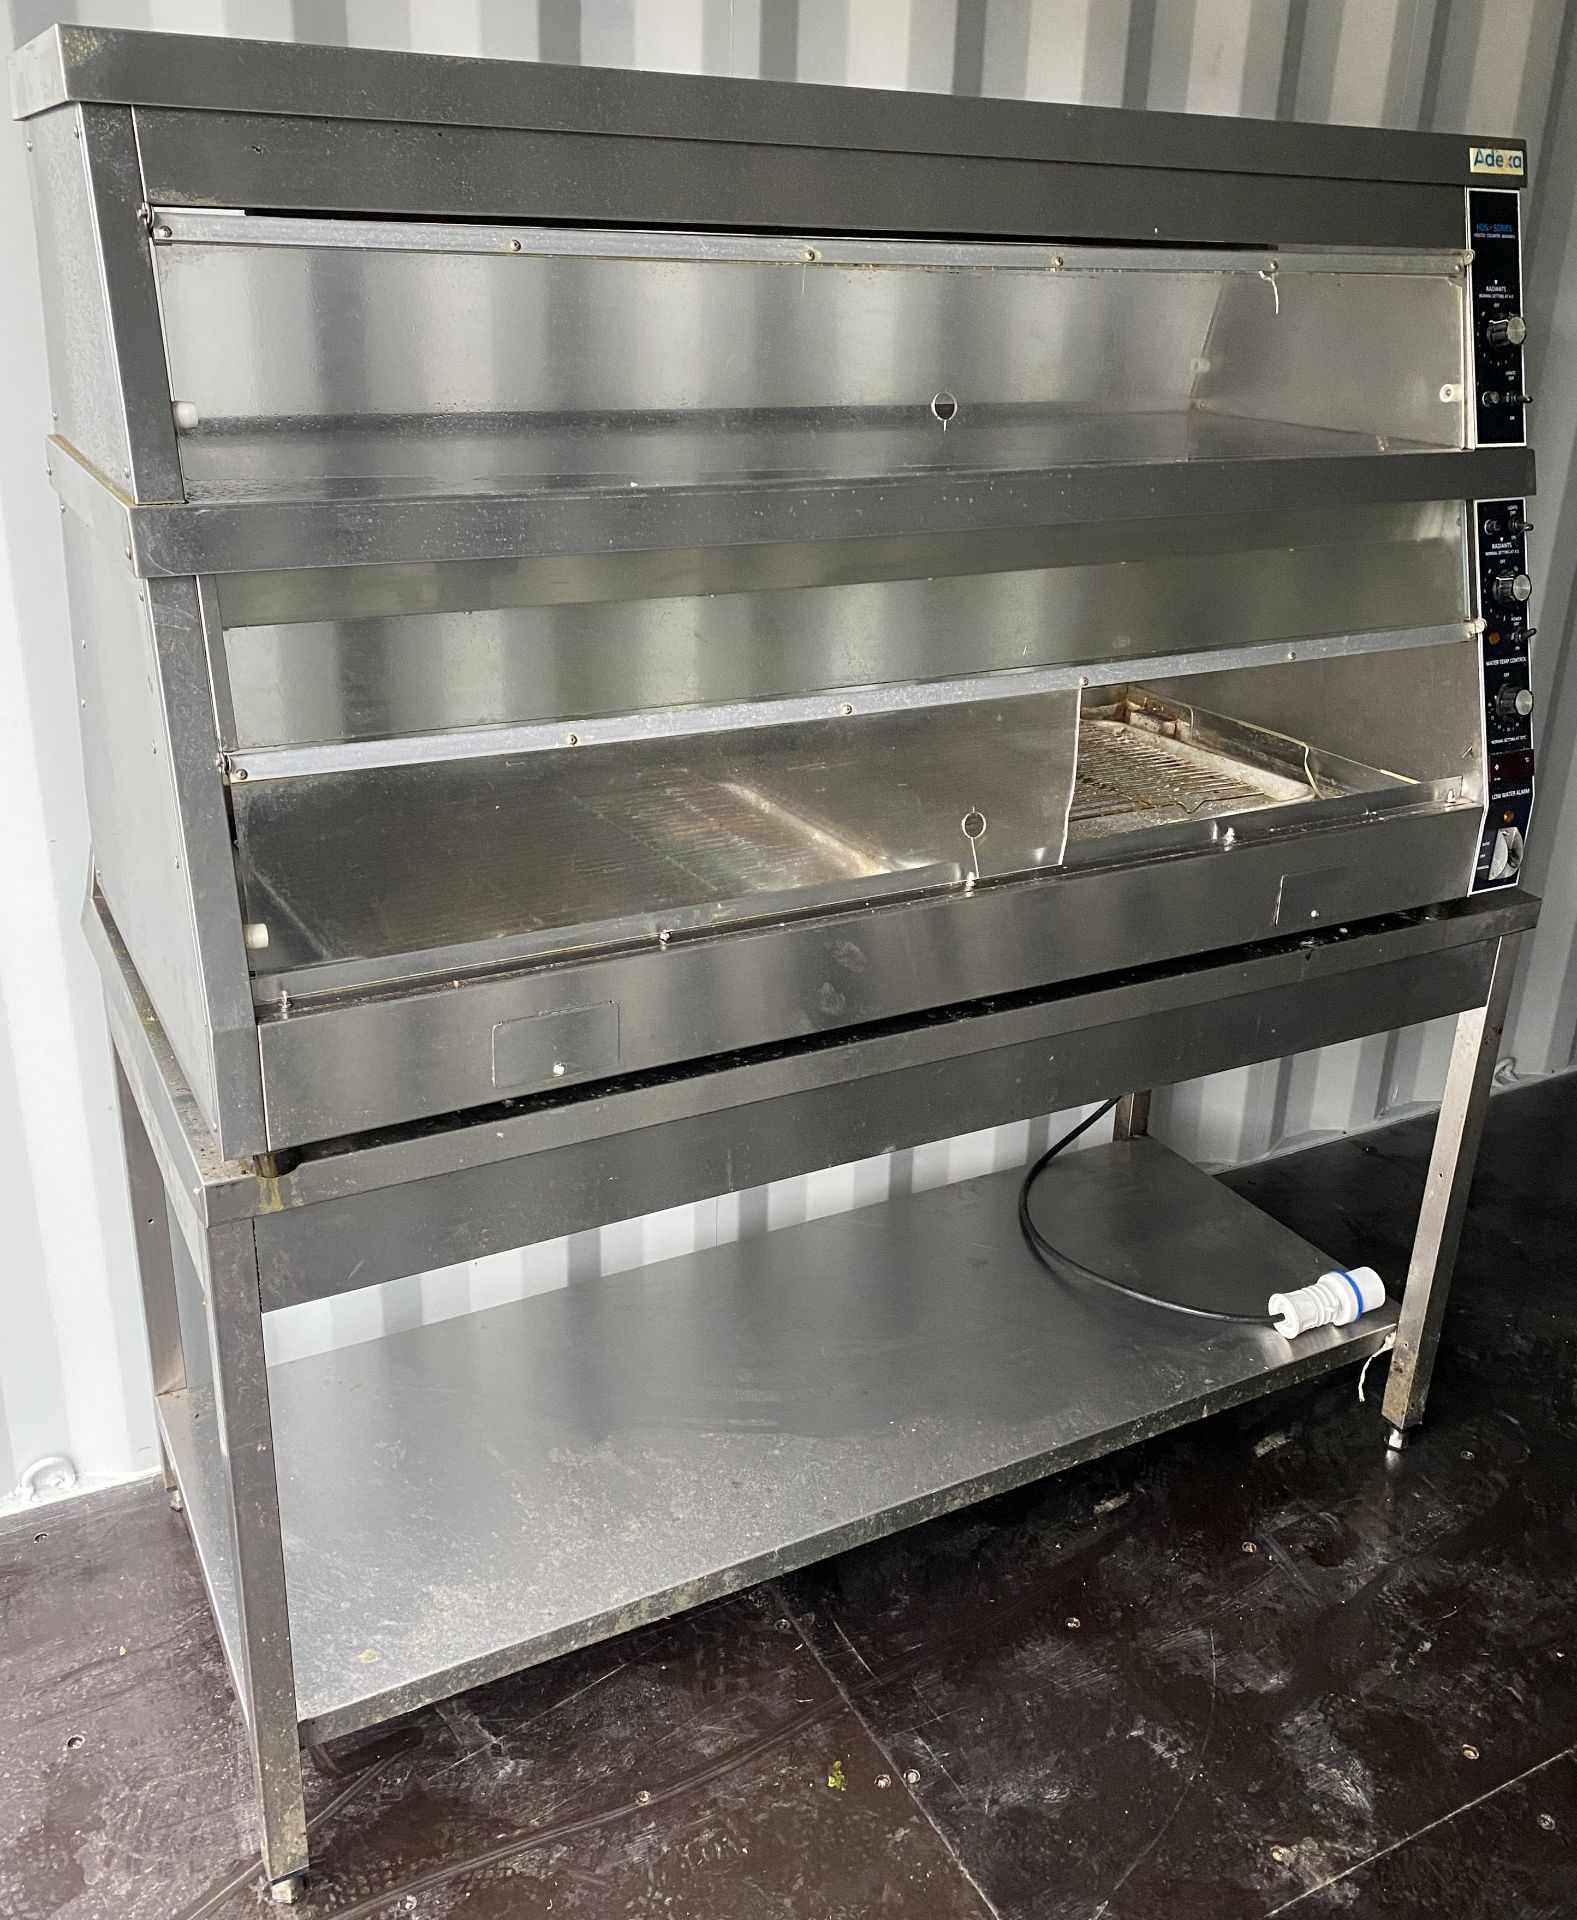 Adexa HDS-Series 2 tier heated counter warmer on stainless steel prep table with undershelf (not - Image 2 of 5